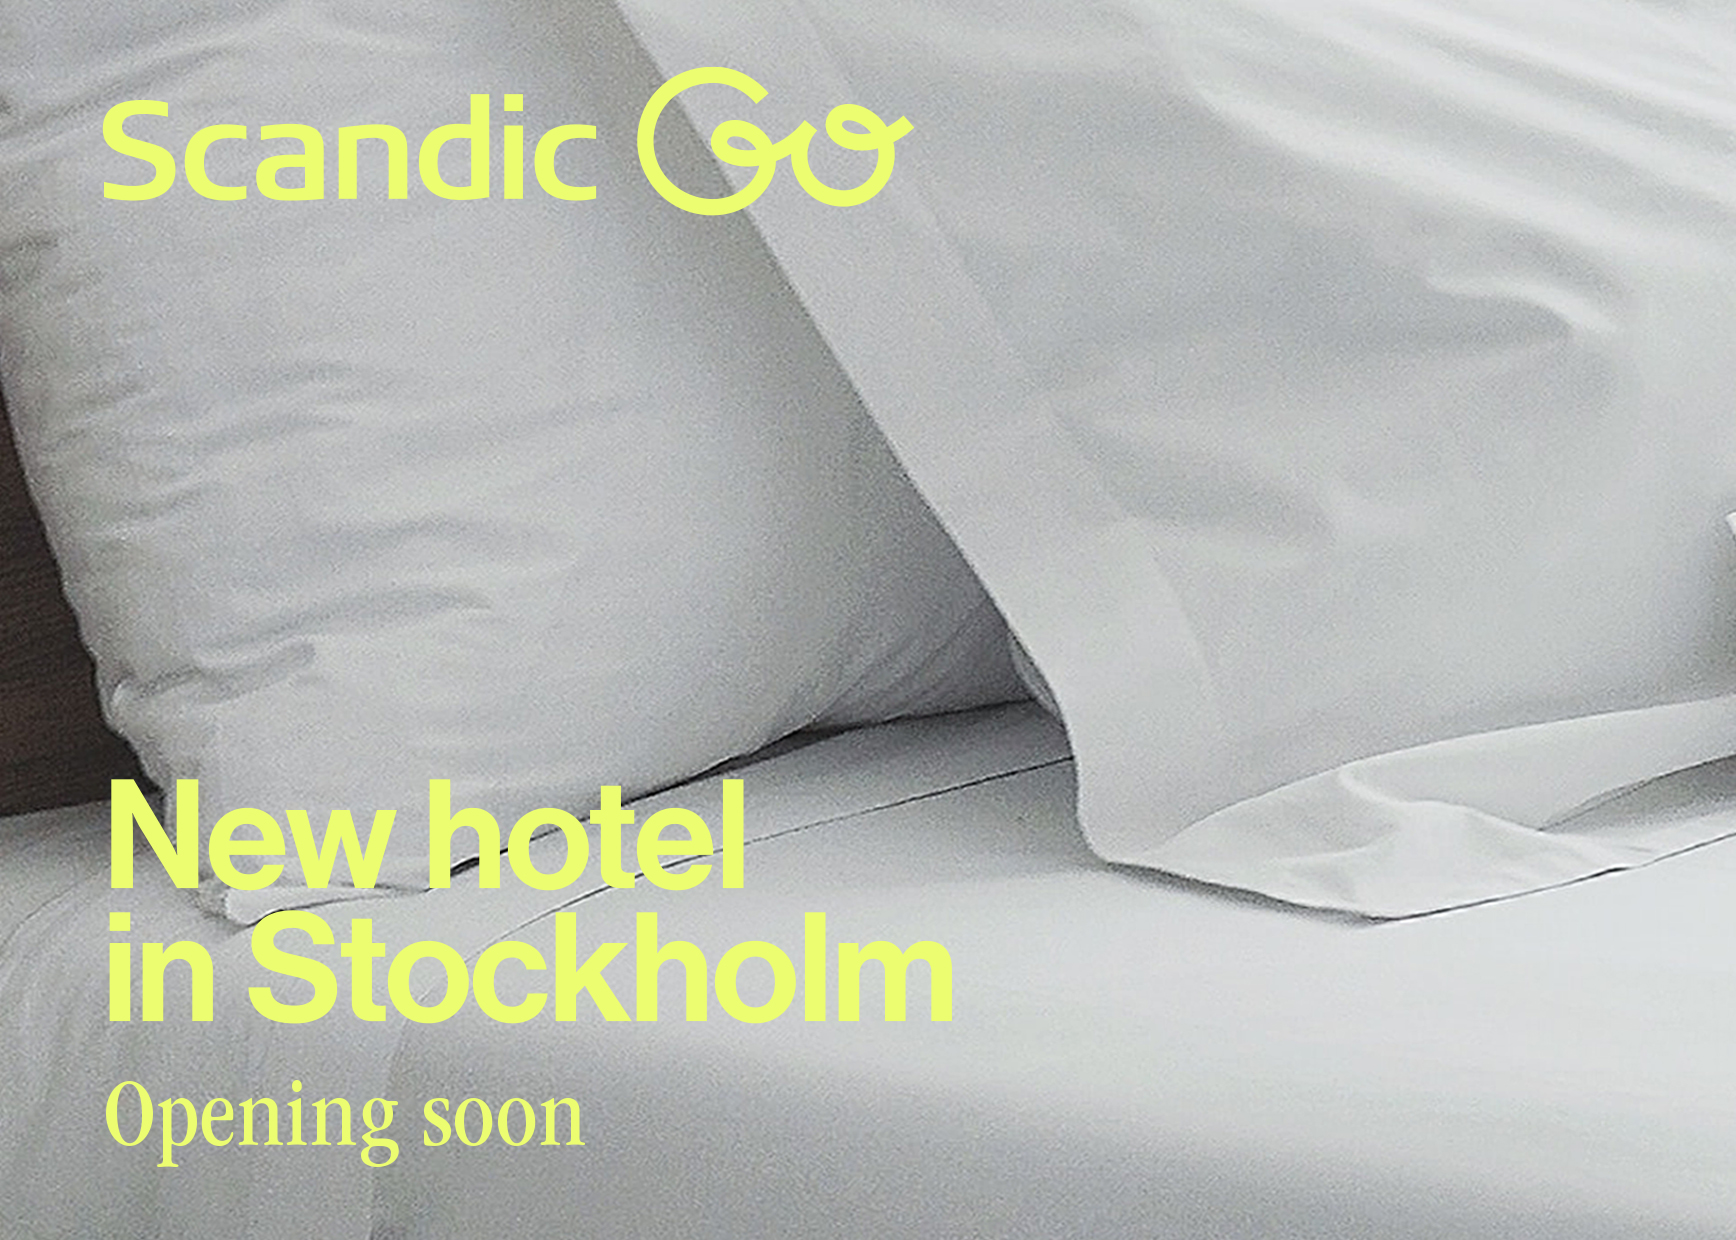 Scandic Go - pillow with text.jpeg